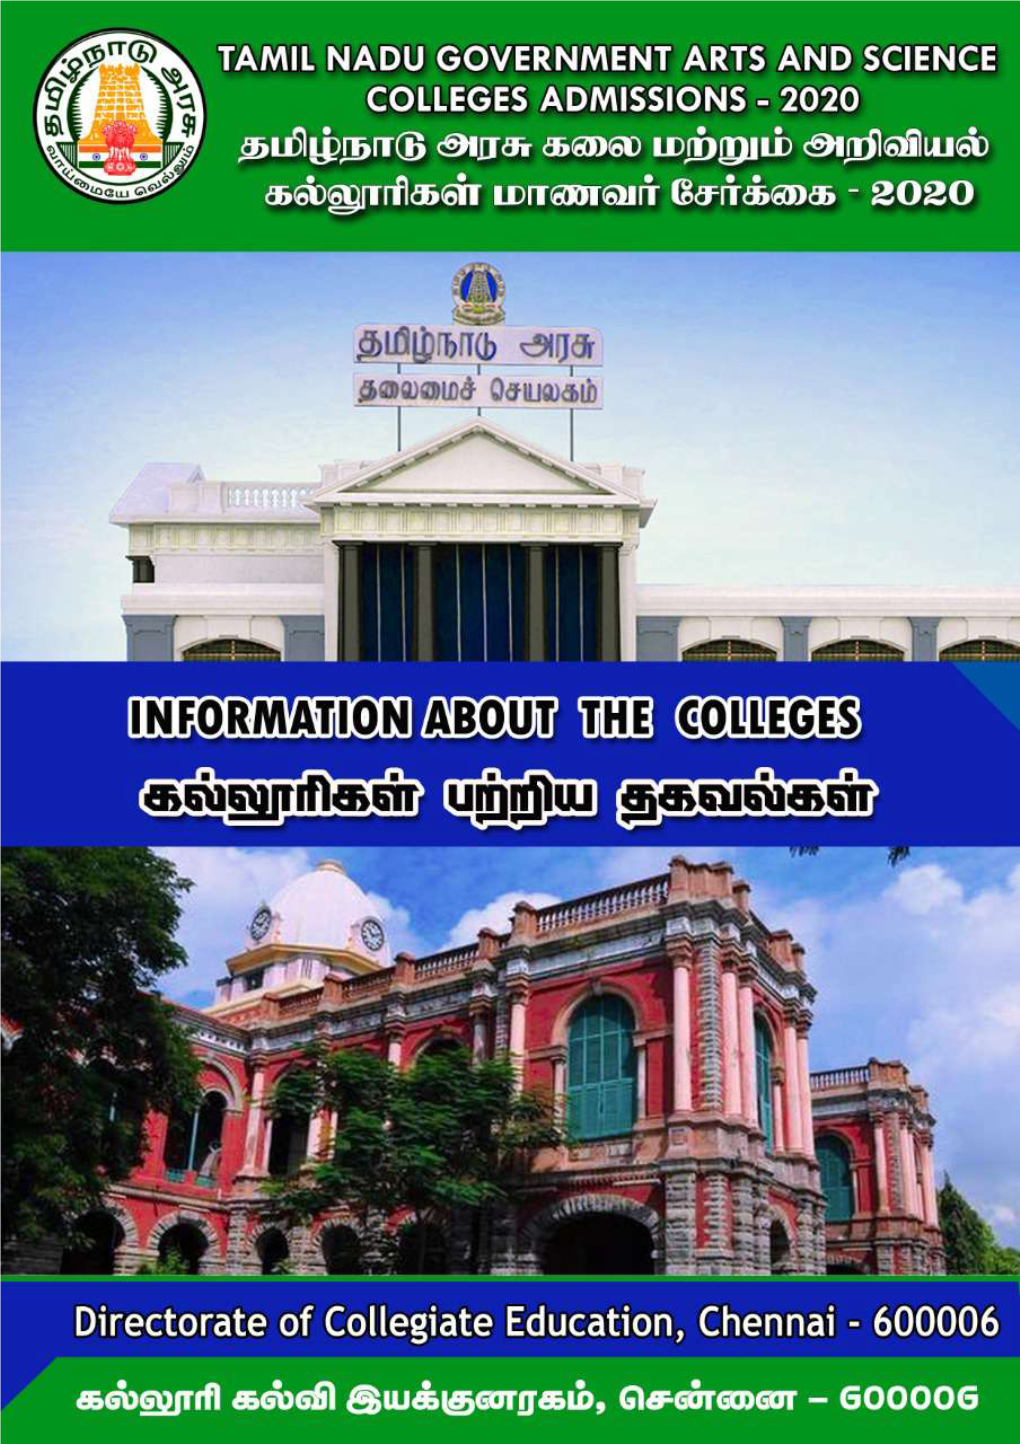 Tamil Nadu Government Arts and Science Colleges Admissions (Tngasa) - 2020